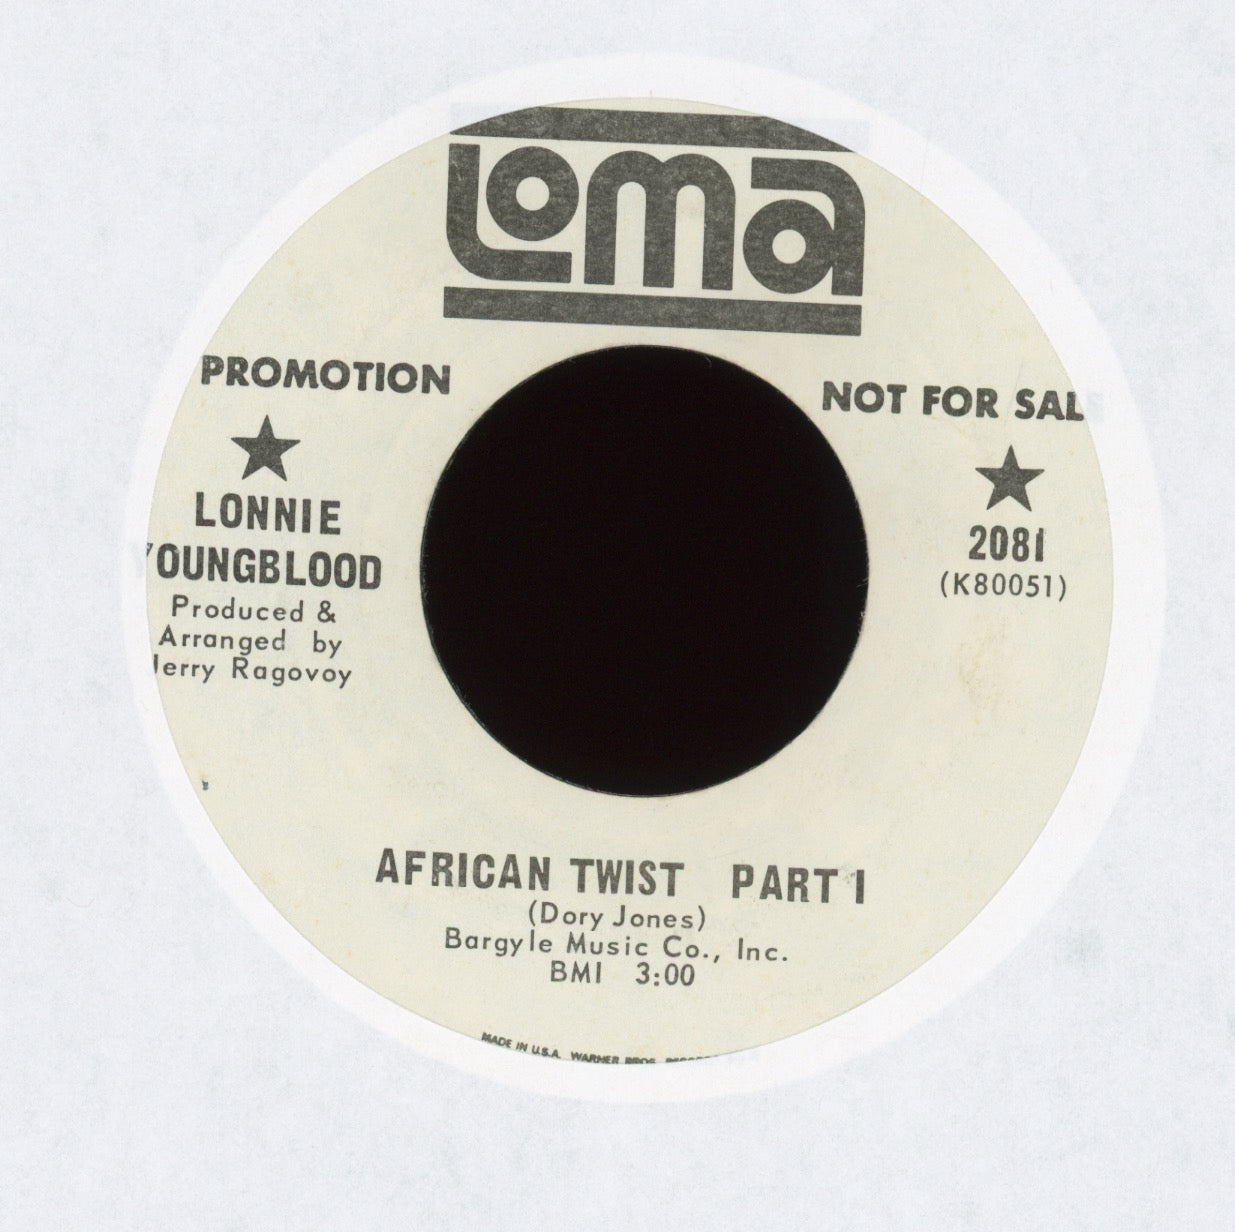 Lonnie Youngblood - African Twist on Loma Promo Funk 45